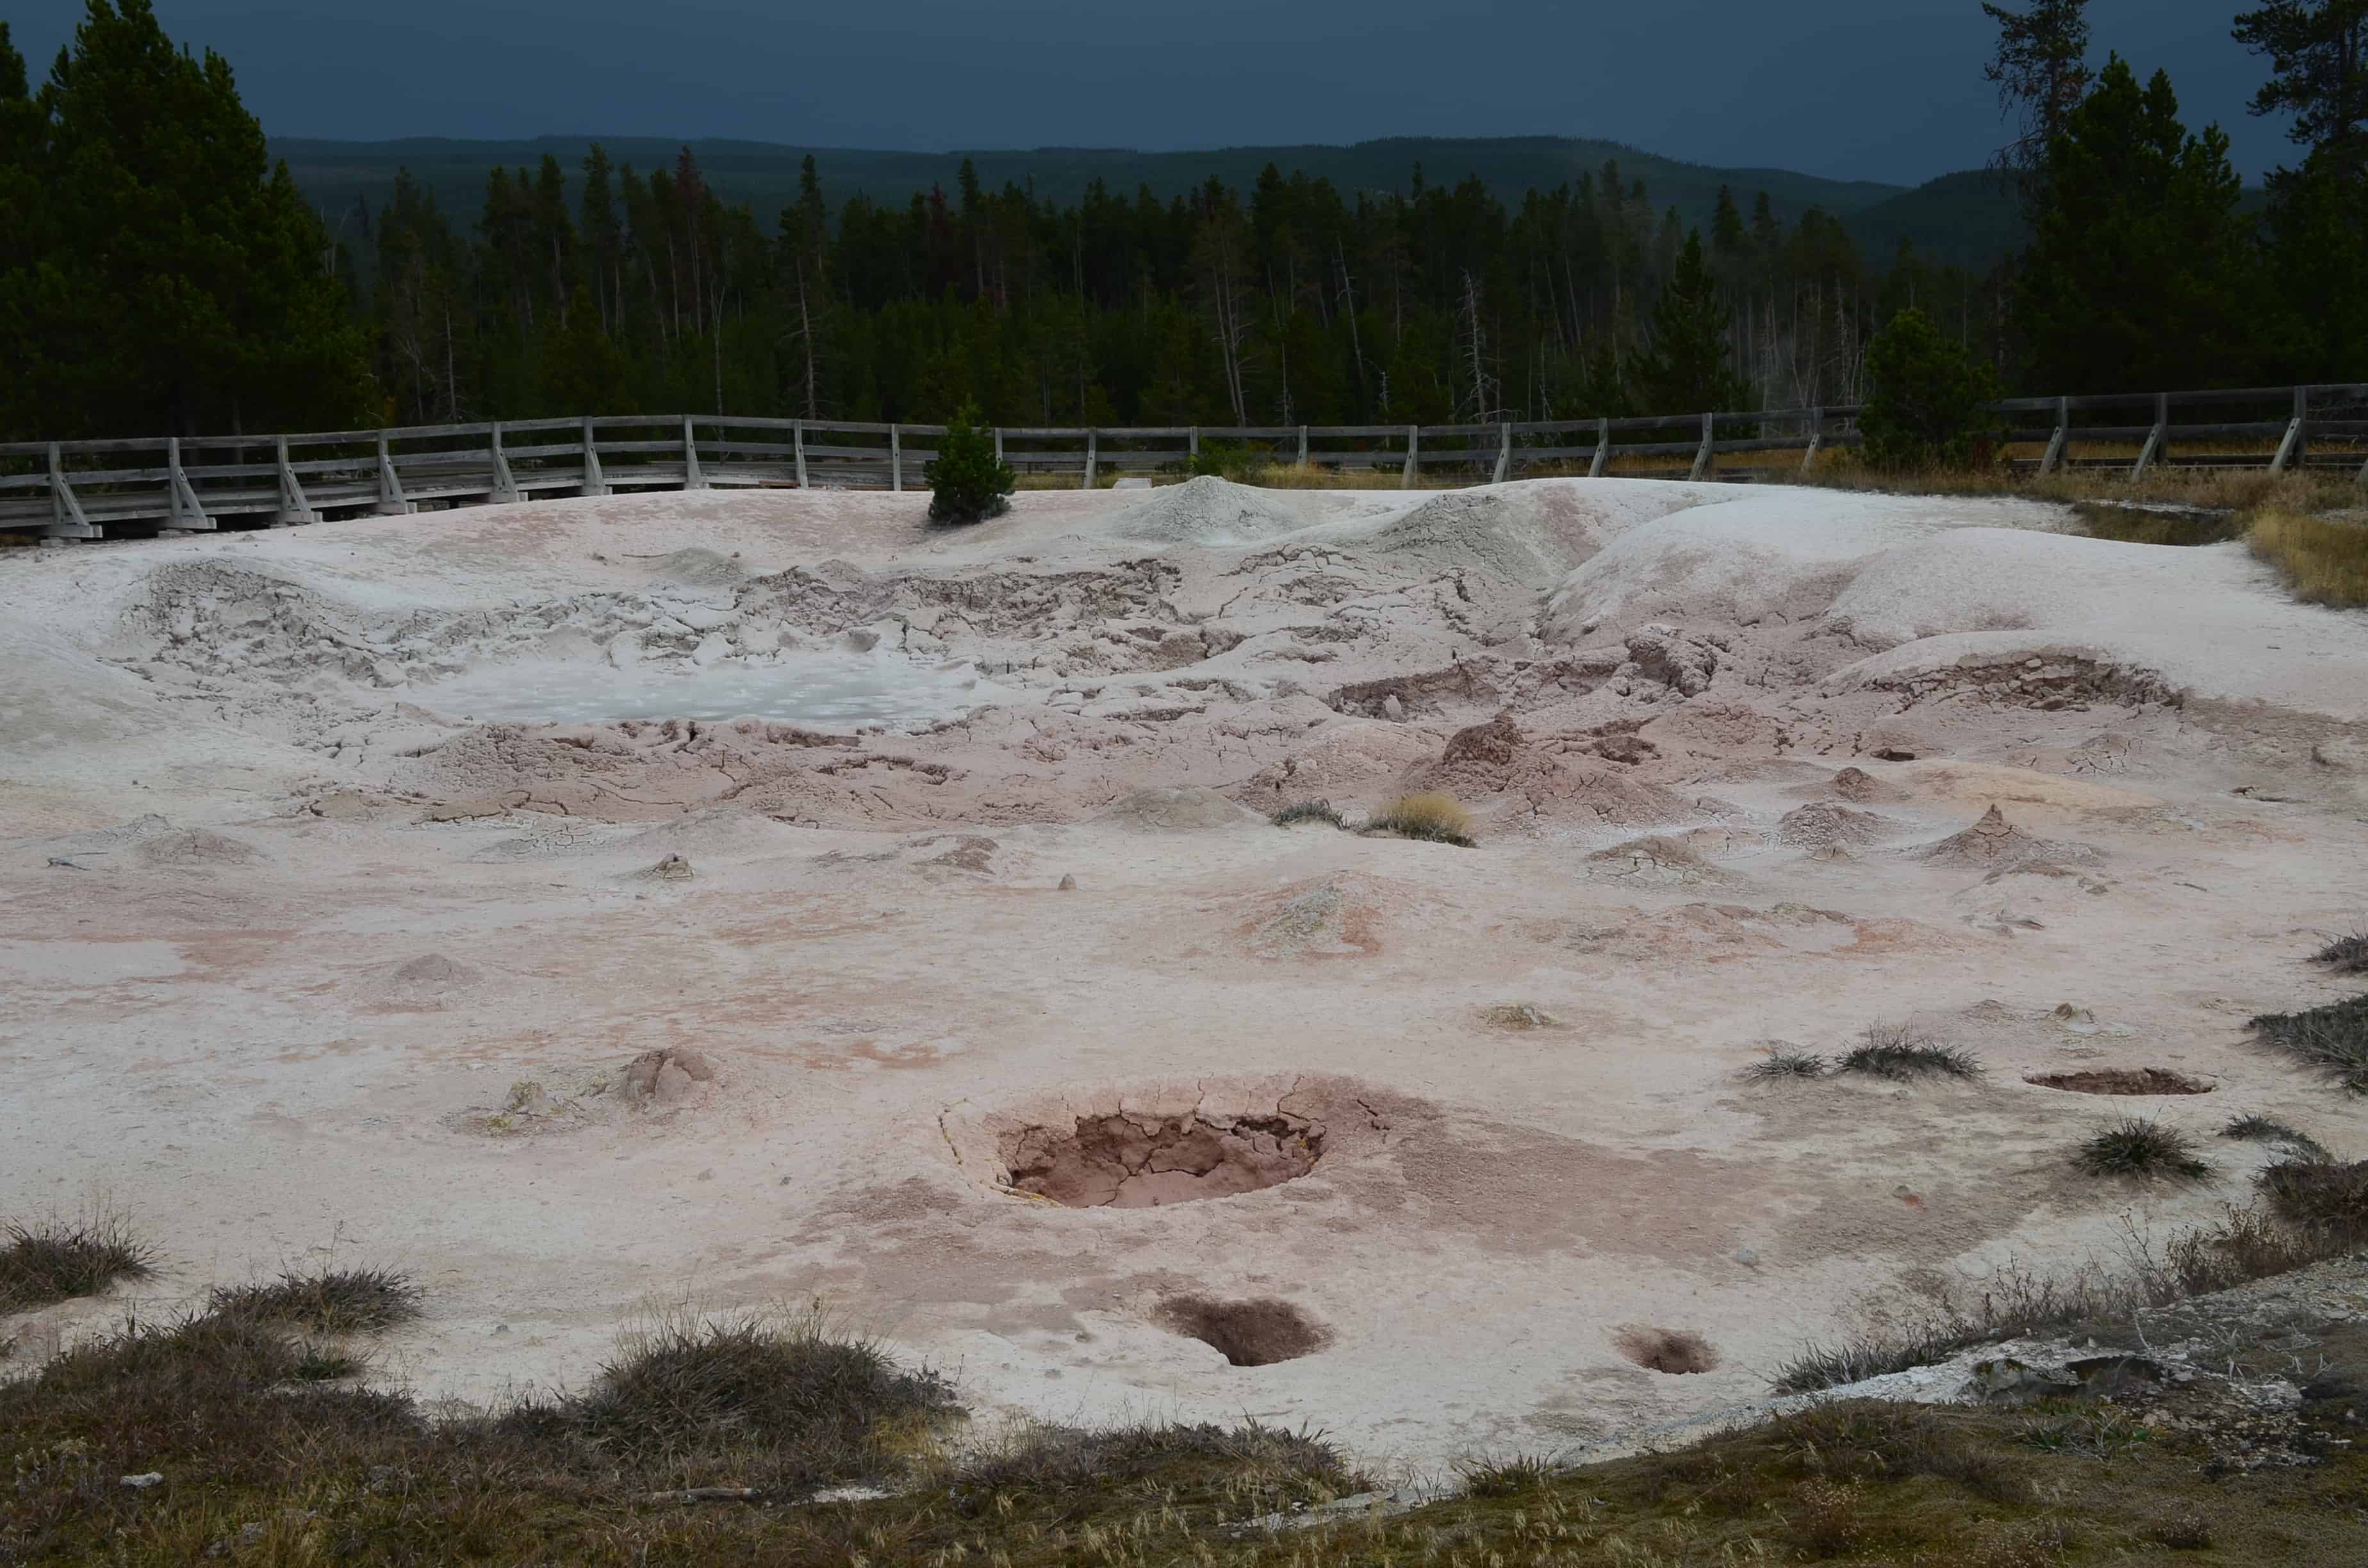 Fountain Paint Pot at the Lower Geyser Basin in Yellowstone National Park, Wyoming